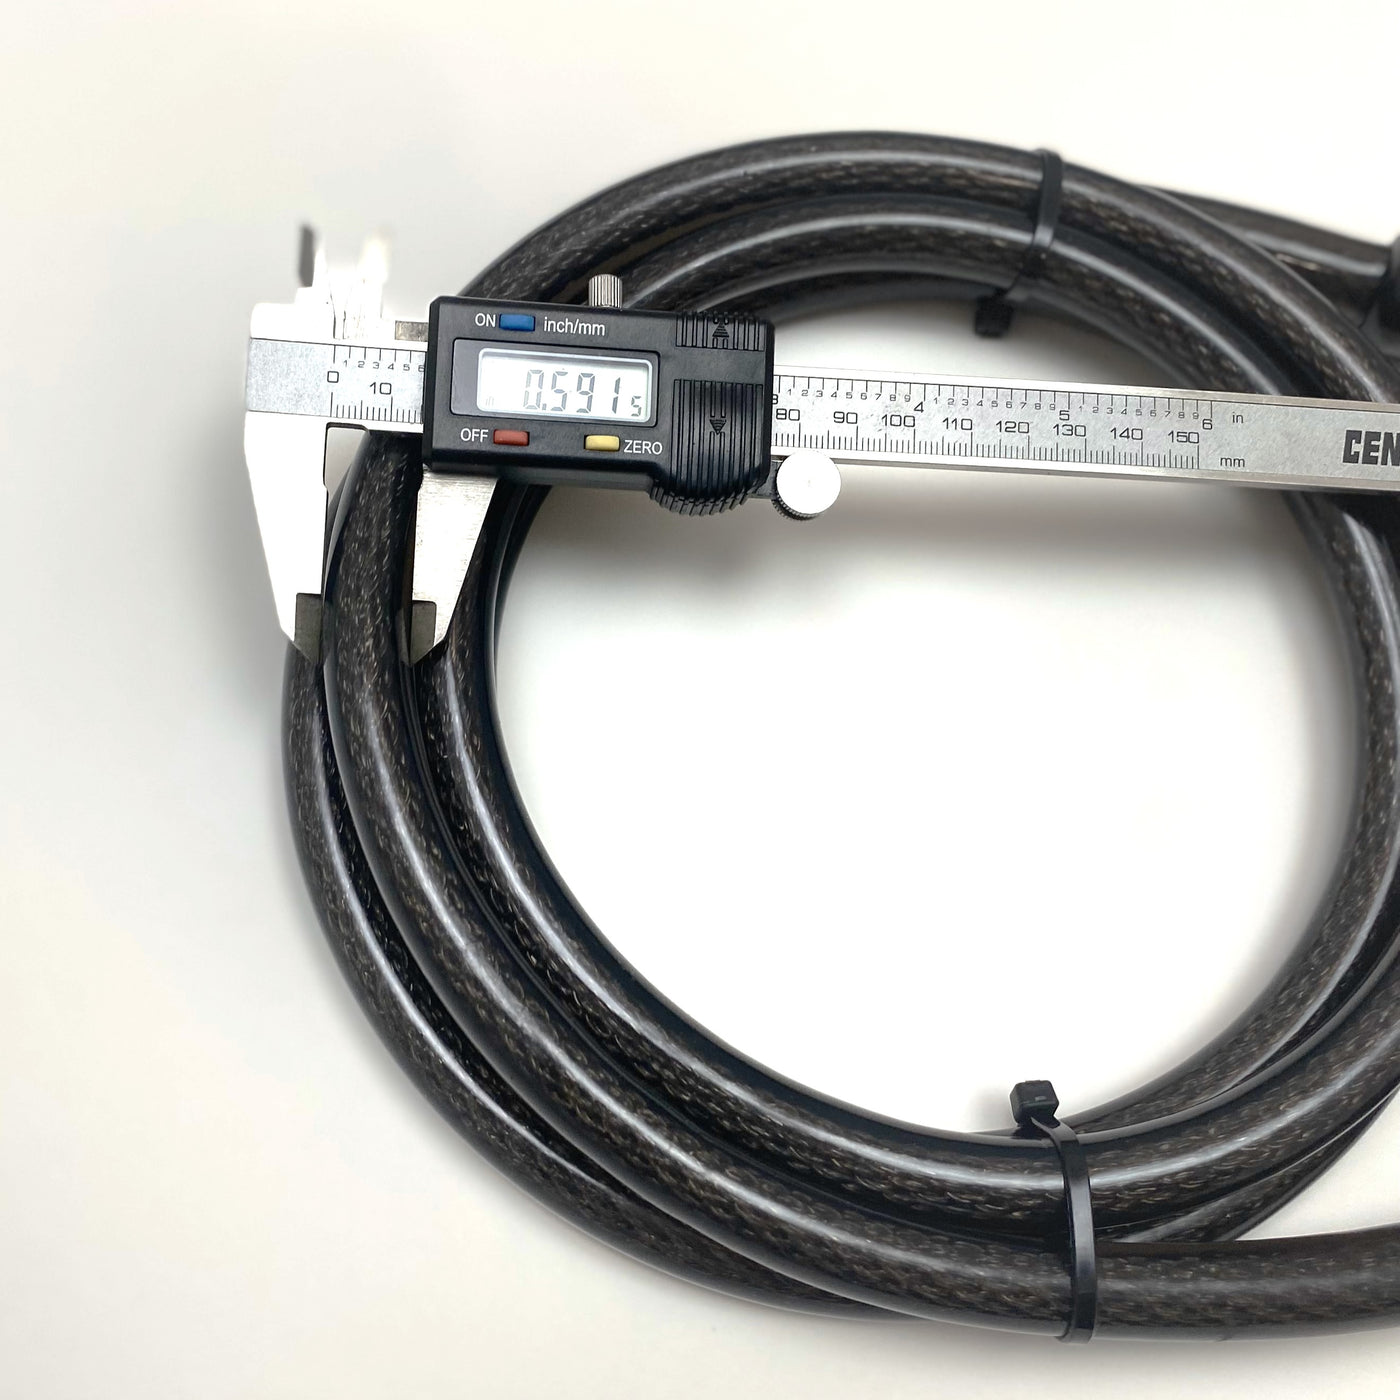 Our heavy-duty high security steel cable delivers unmatched protection. With a thickness of 15mm (5/8") and a length of 8 feet, it's built to withstand even the toughest challenges. 